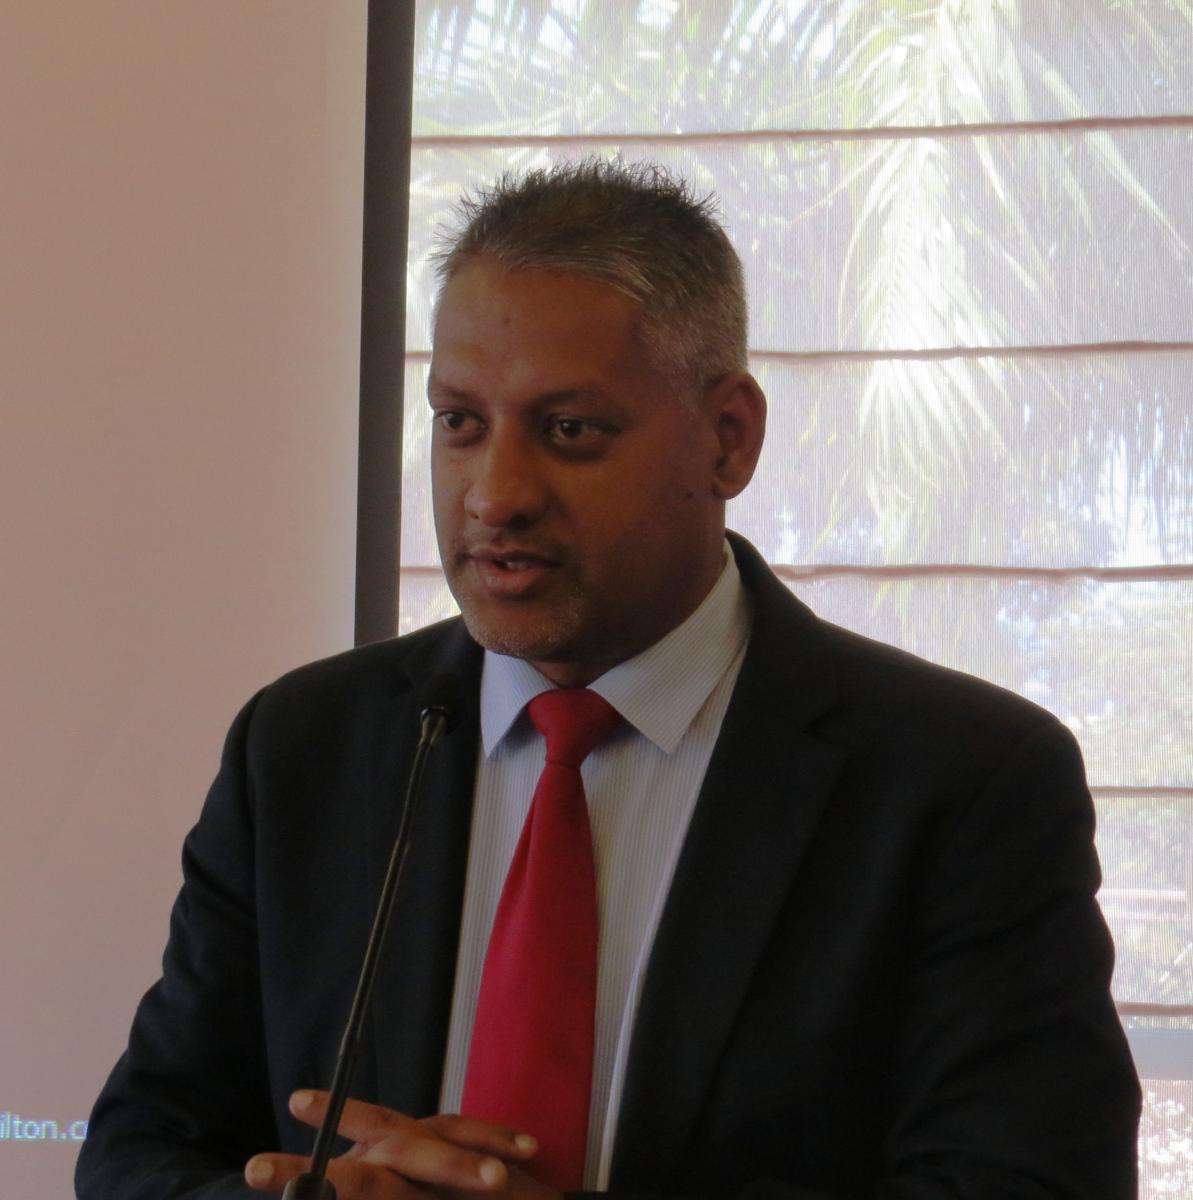 Hon. Clarence Rambharath, Minister of Agriculture, Lands & Fisheries of Trinidad and Tobago